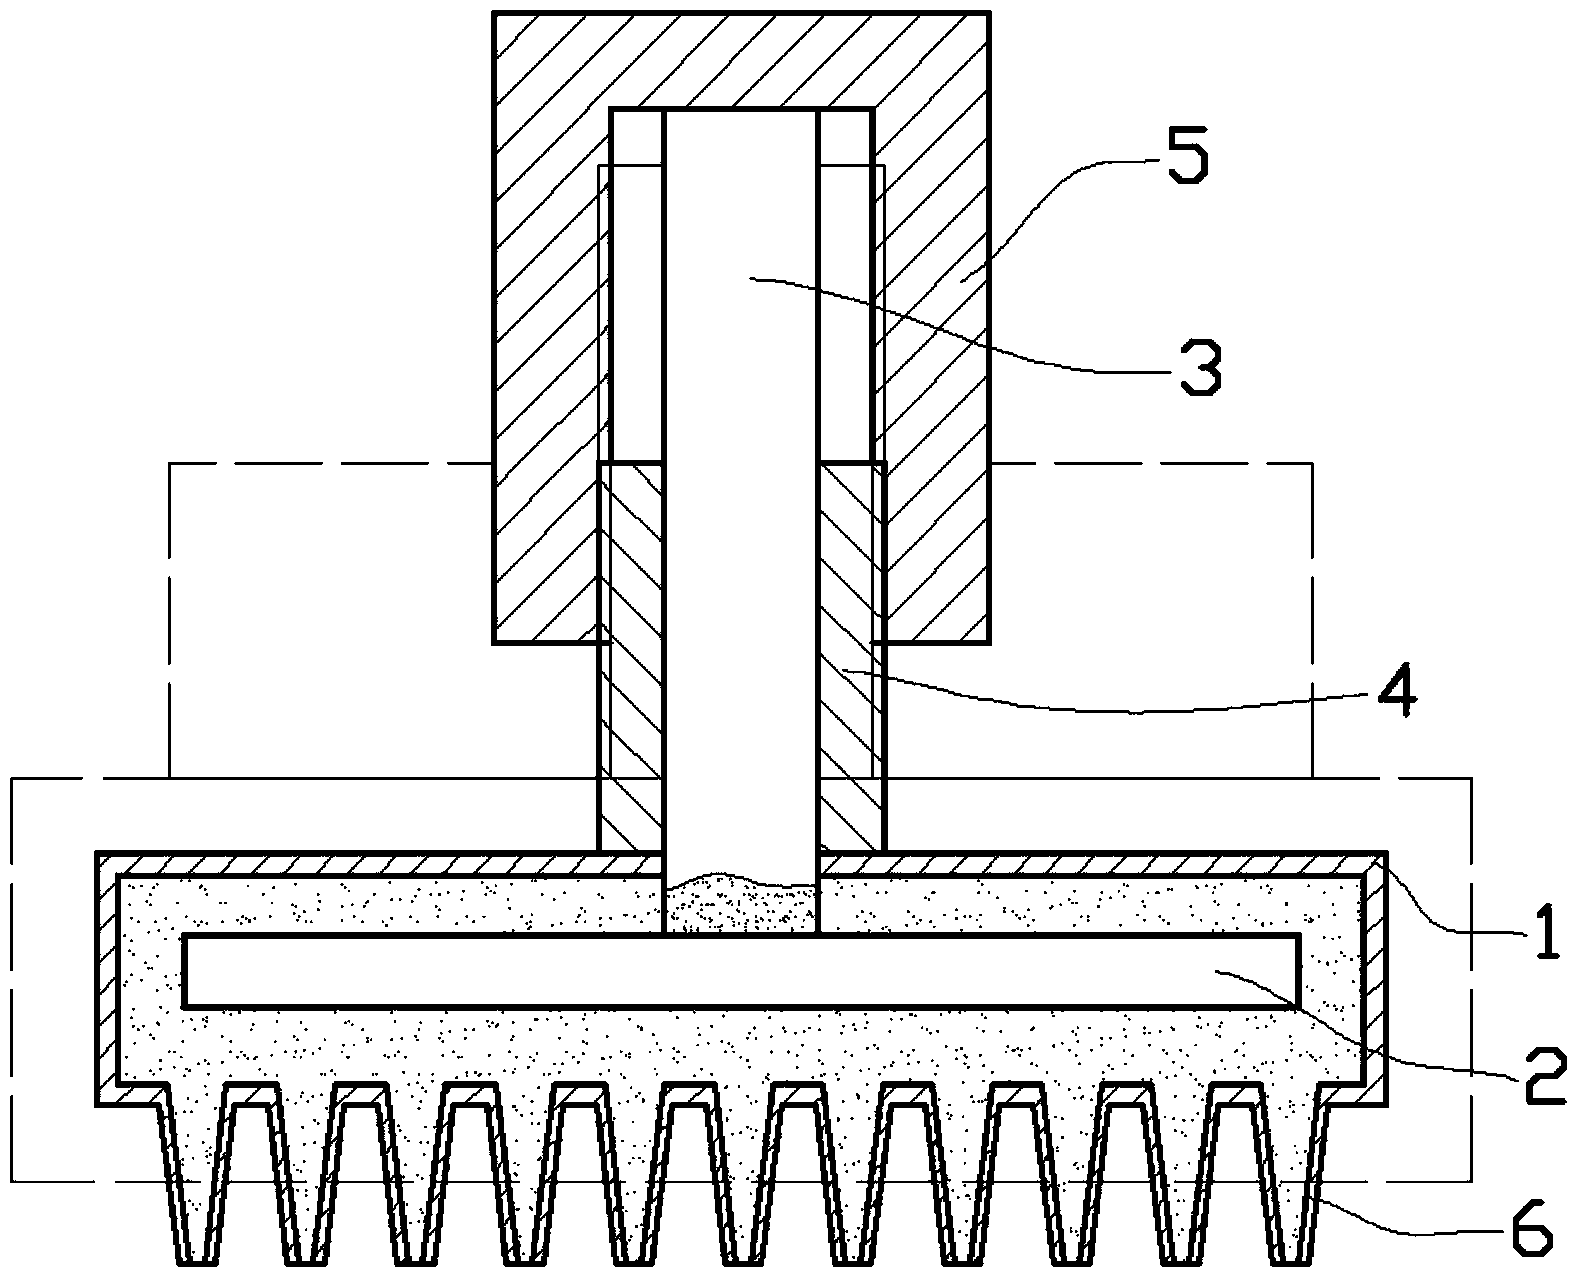 Circuit board one-time welding device